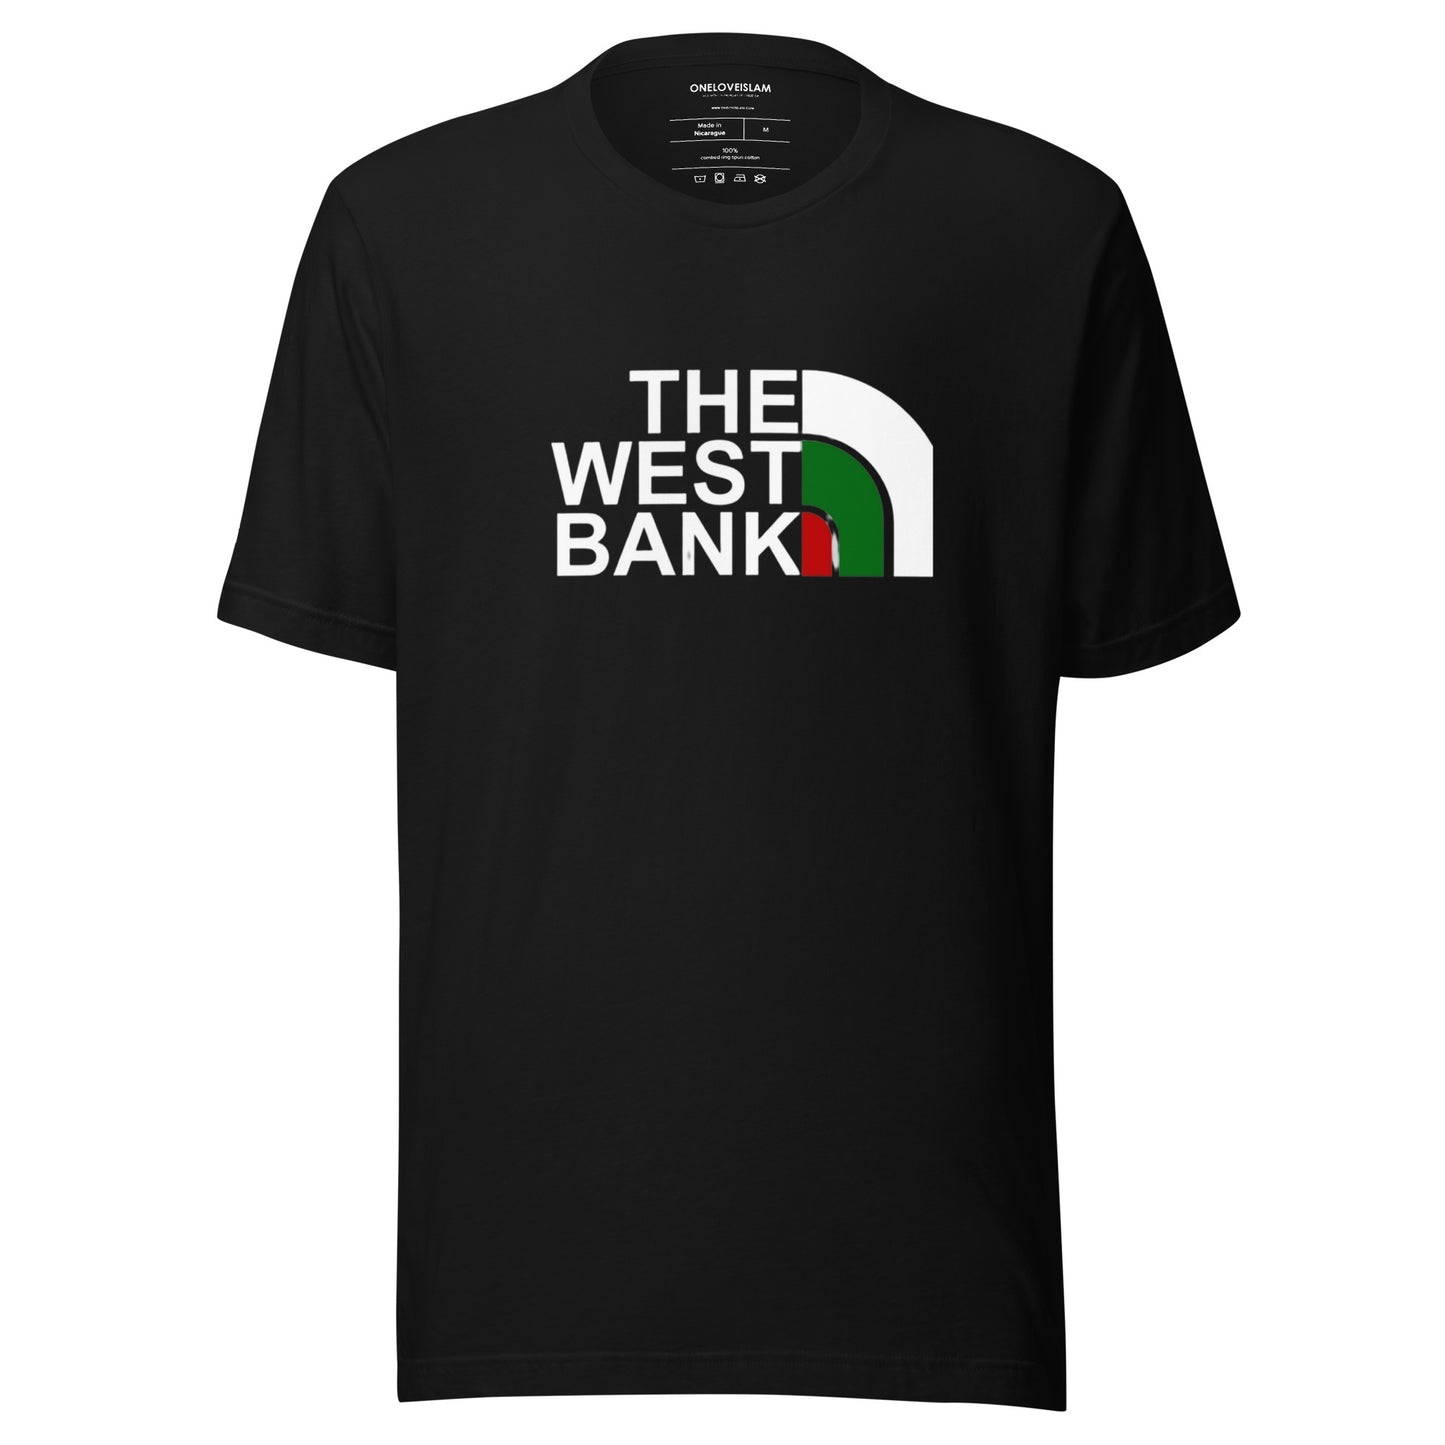 The West Bank T